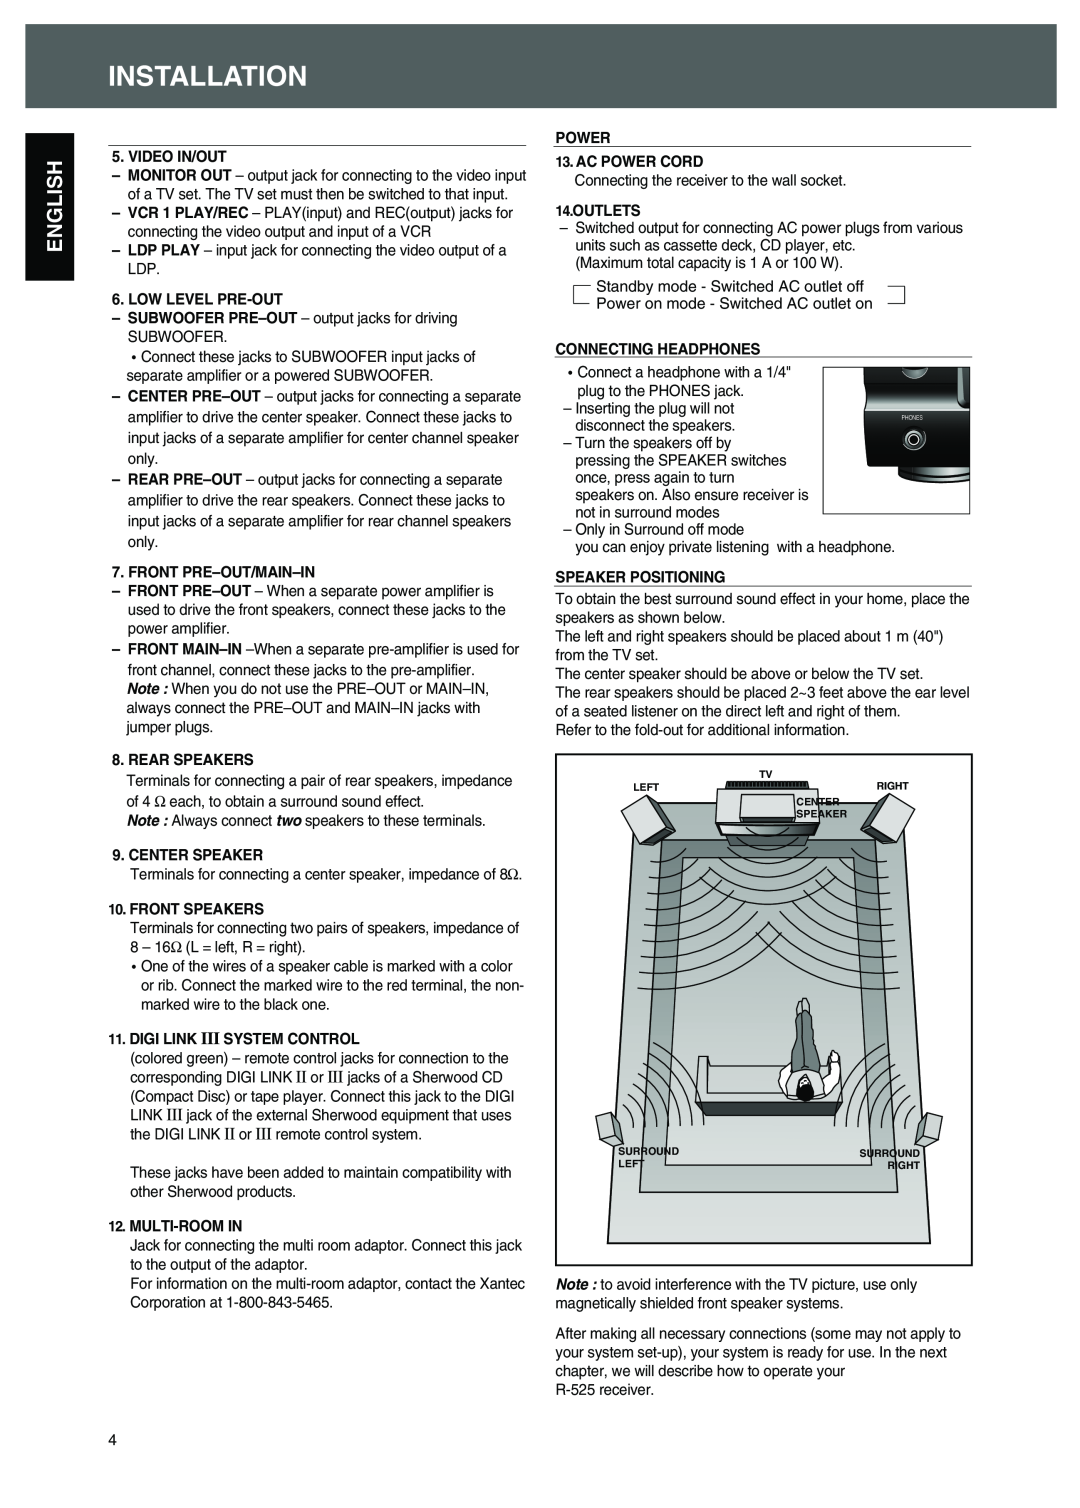 Sherwood R-525 operating instructions SPEAKER POSITIONING 5. VIDEO IN/OUT, Installation, English 